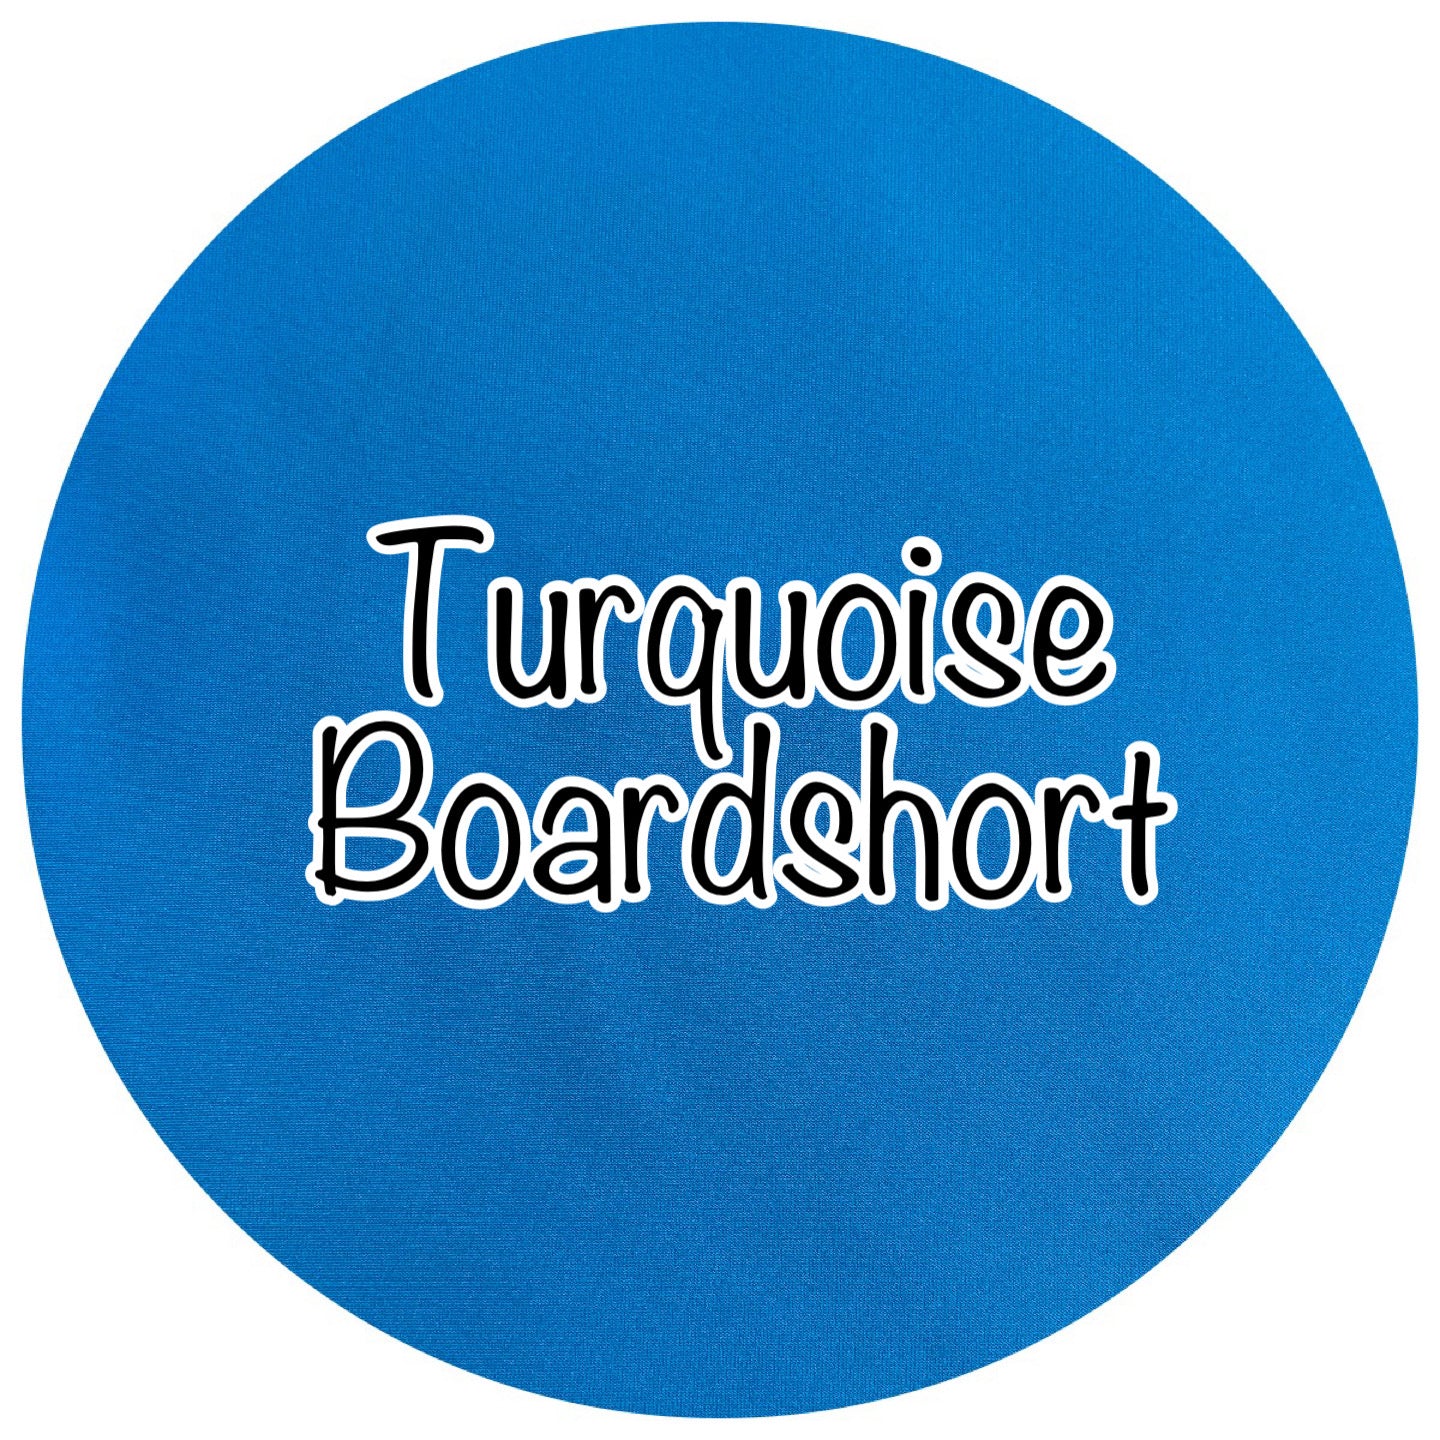 Turquoise Board Shorts